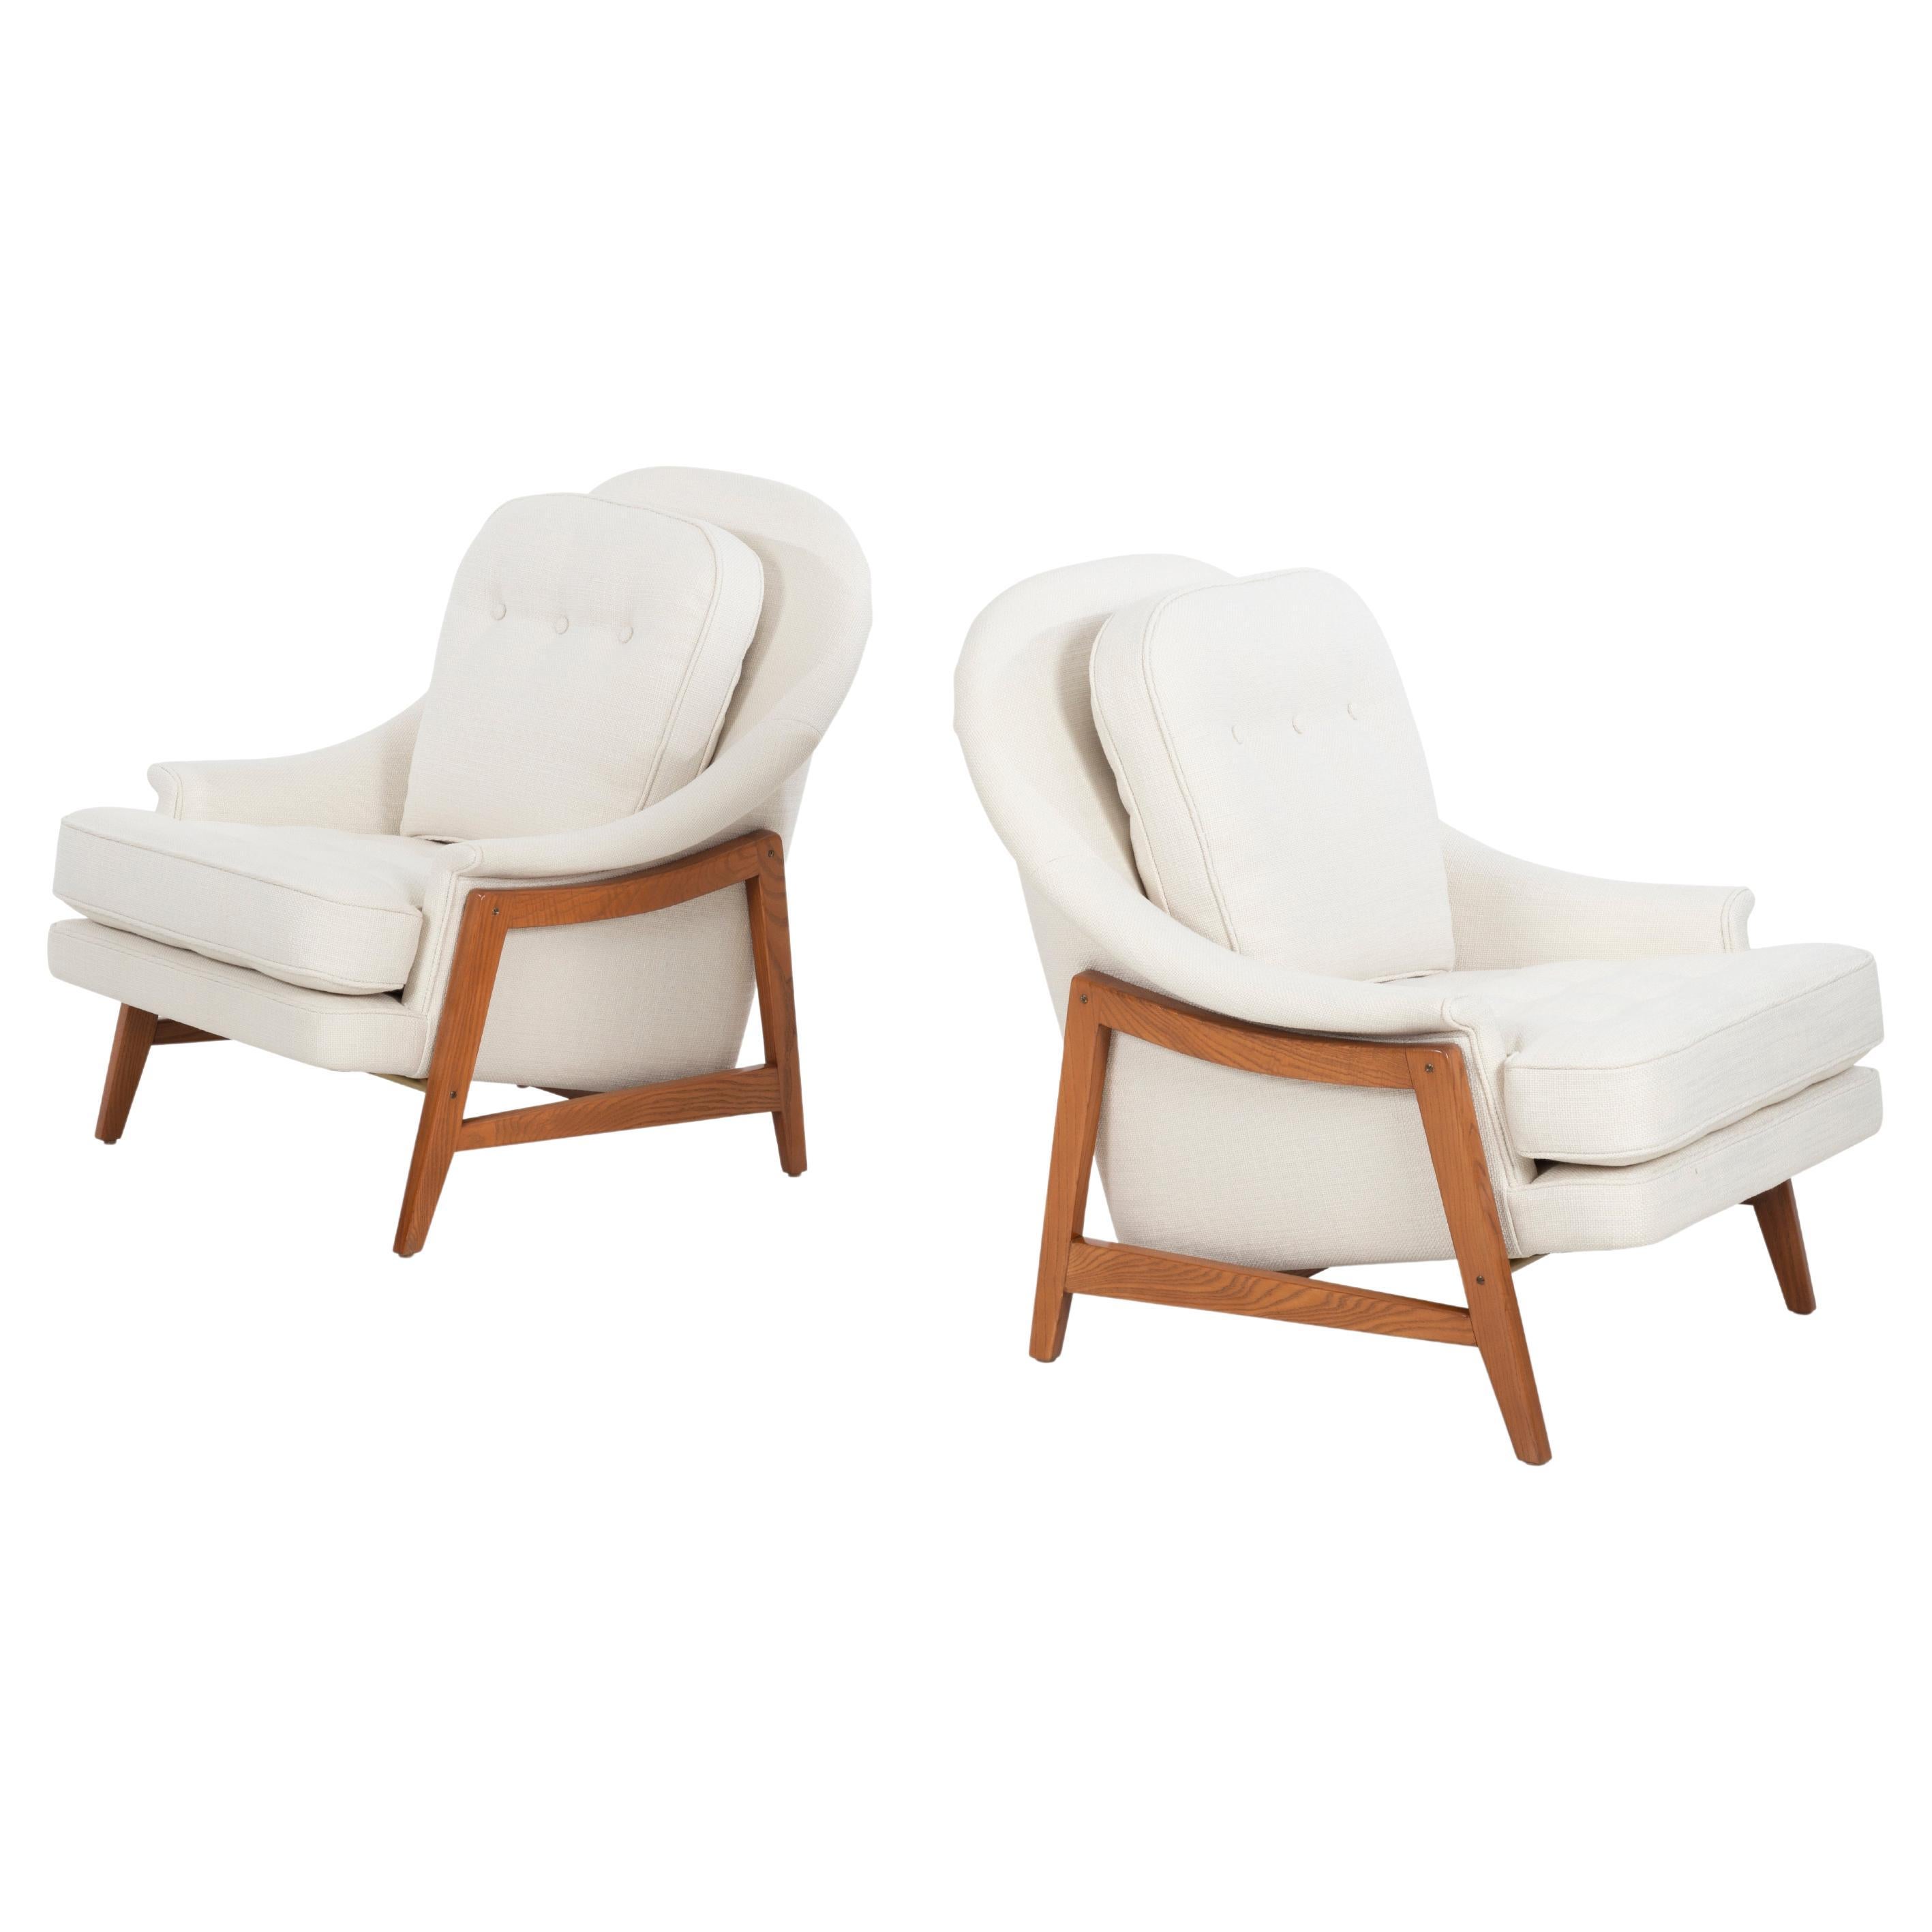 Janus Lounge Chairs by Edward Wormley for Dunbar